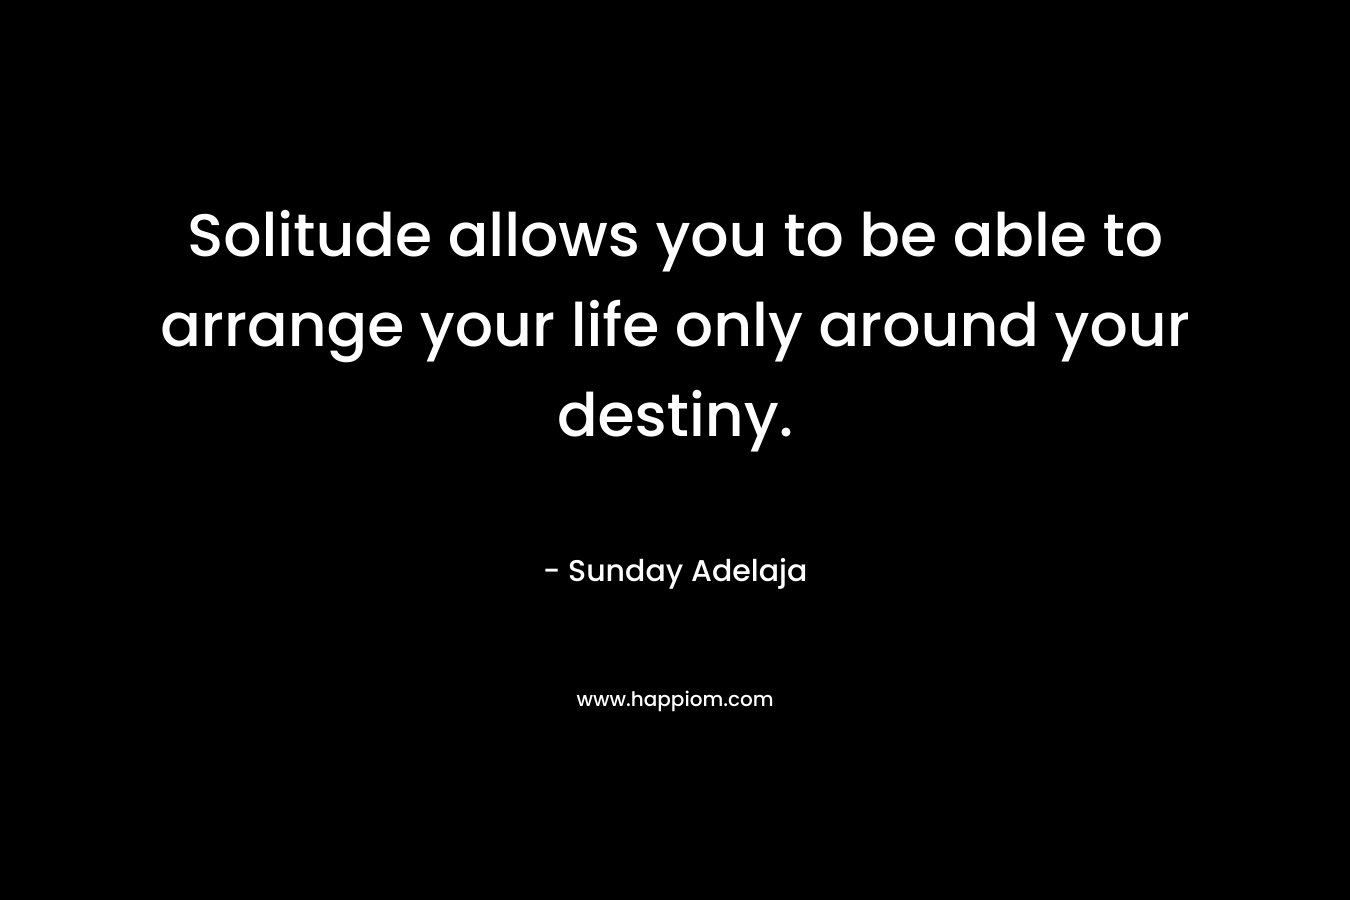 Solitude allows you to be able to arrange your life only around your destiny. – Sunday Adelaja